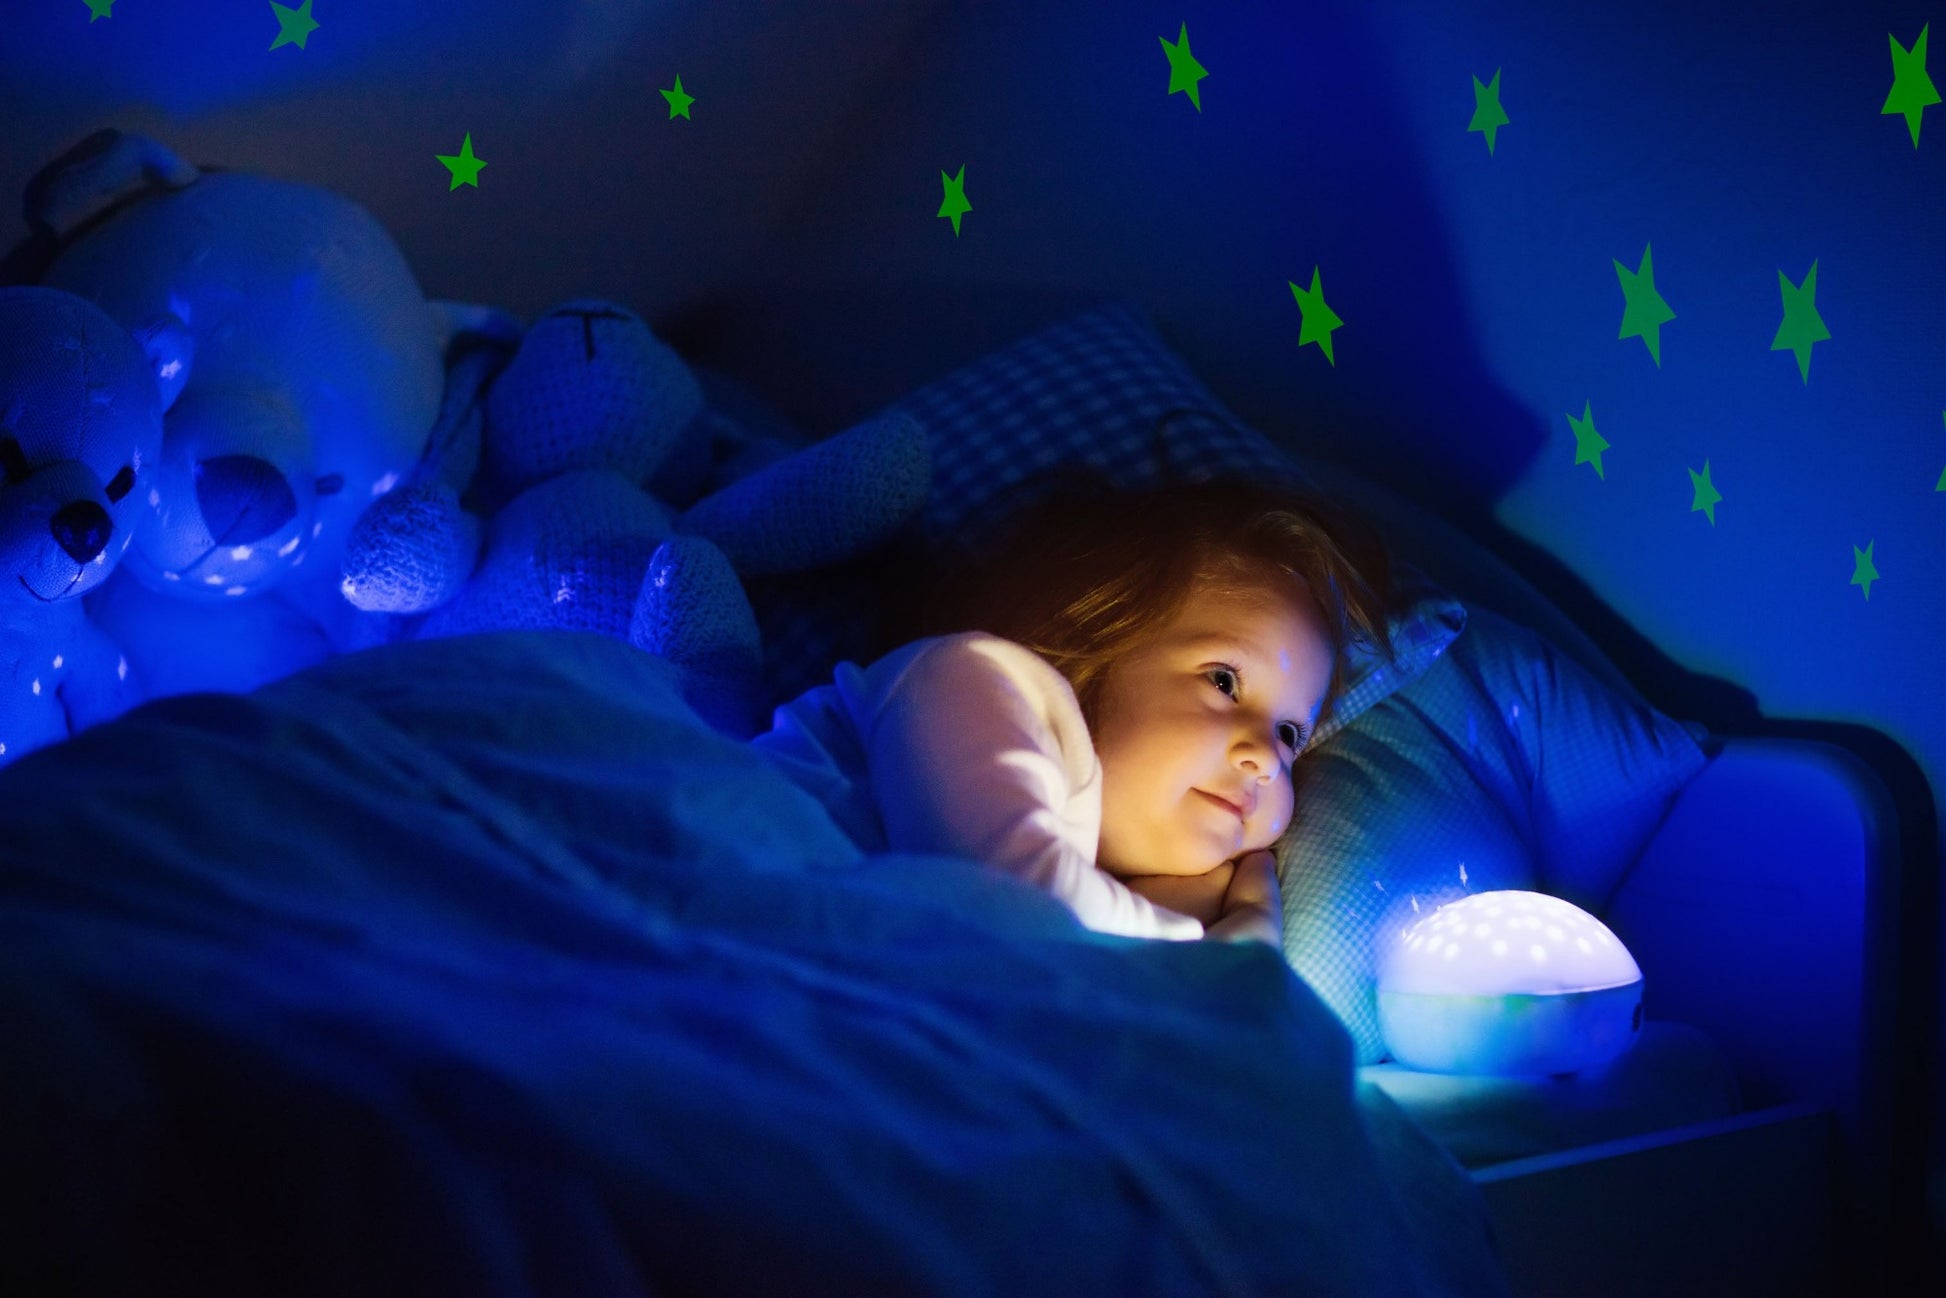 Girl with a bedtime light and stars on the wall glowing behind her